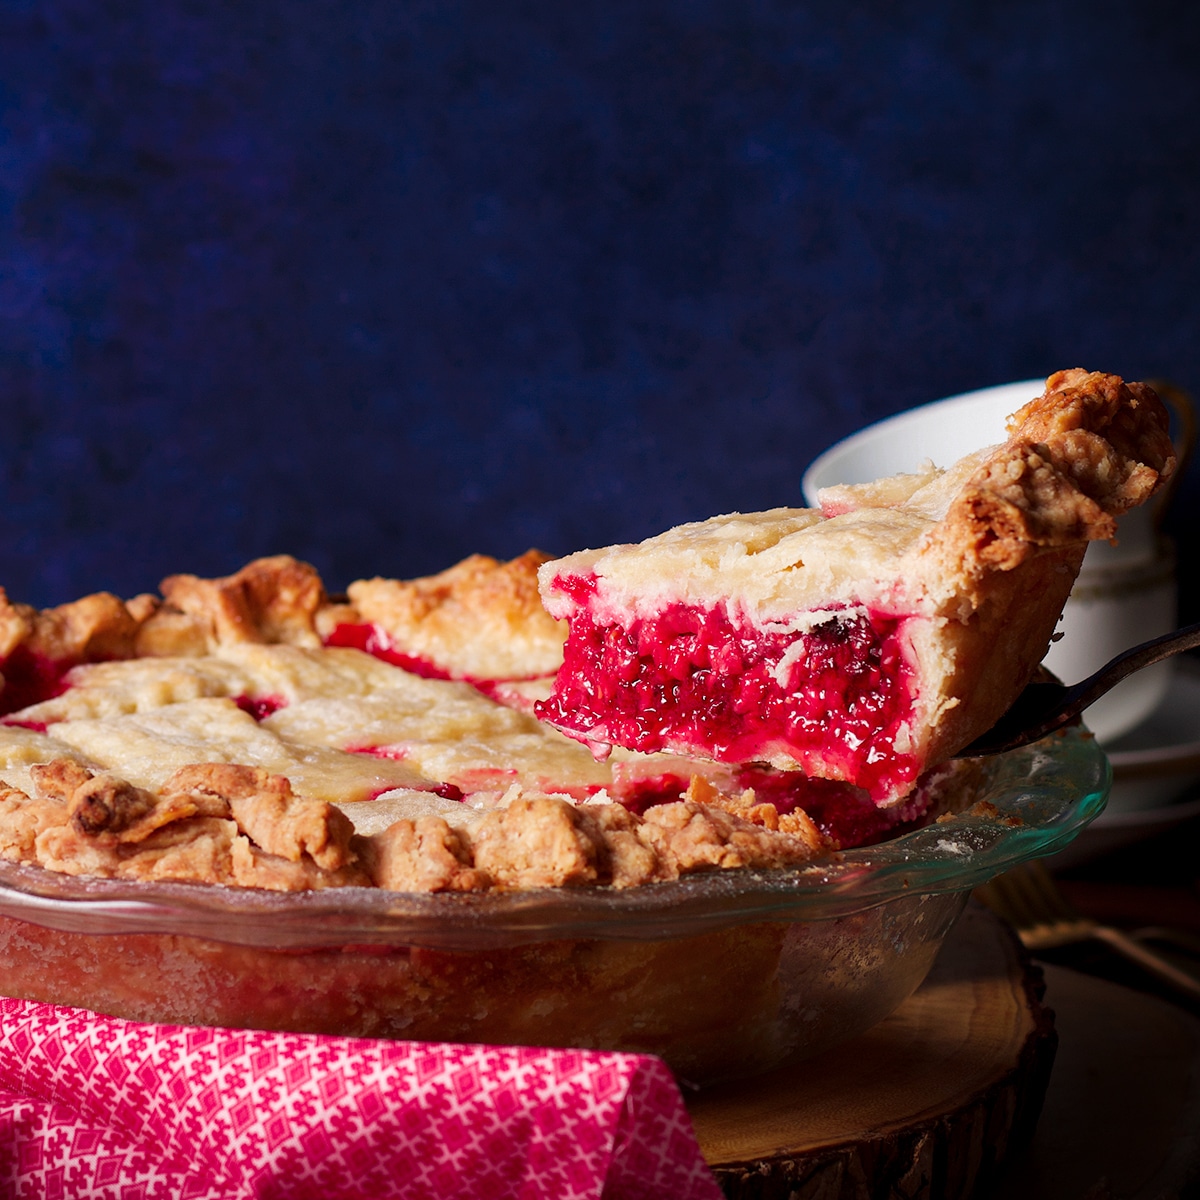 Using a pie server to lift a slice of raspberry pie from the pie plate to serve.